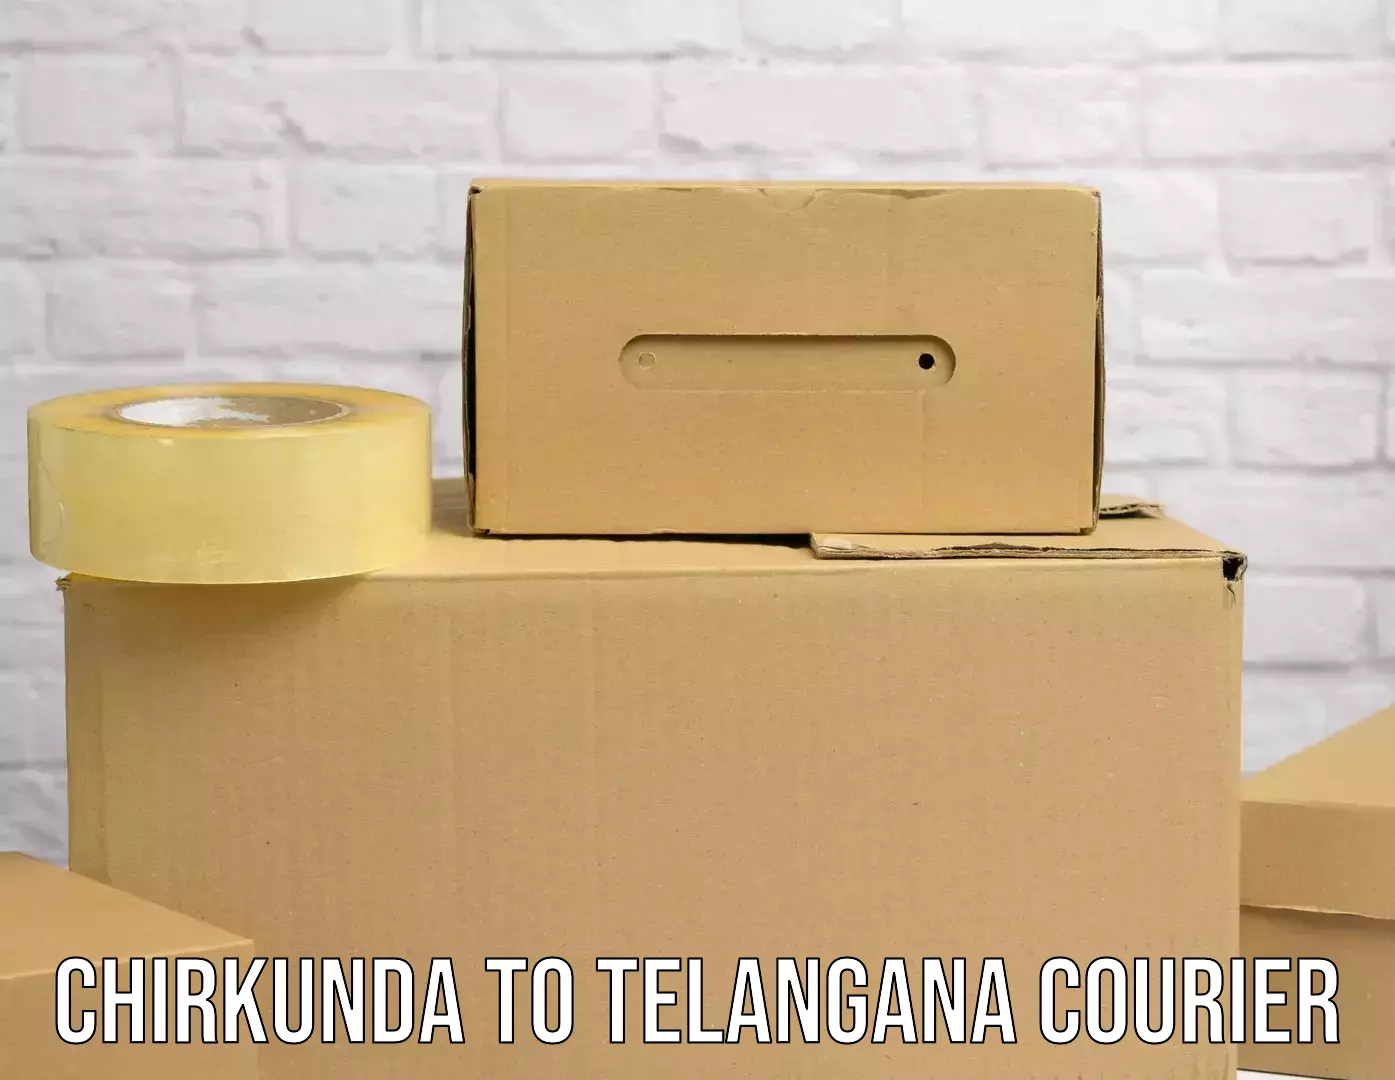 Express package delivery in Chirkunda to Marikal